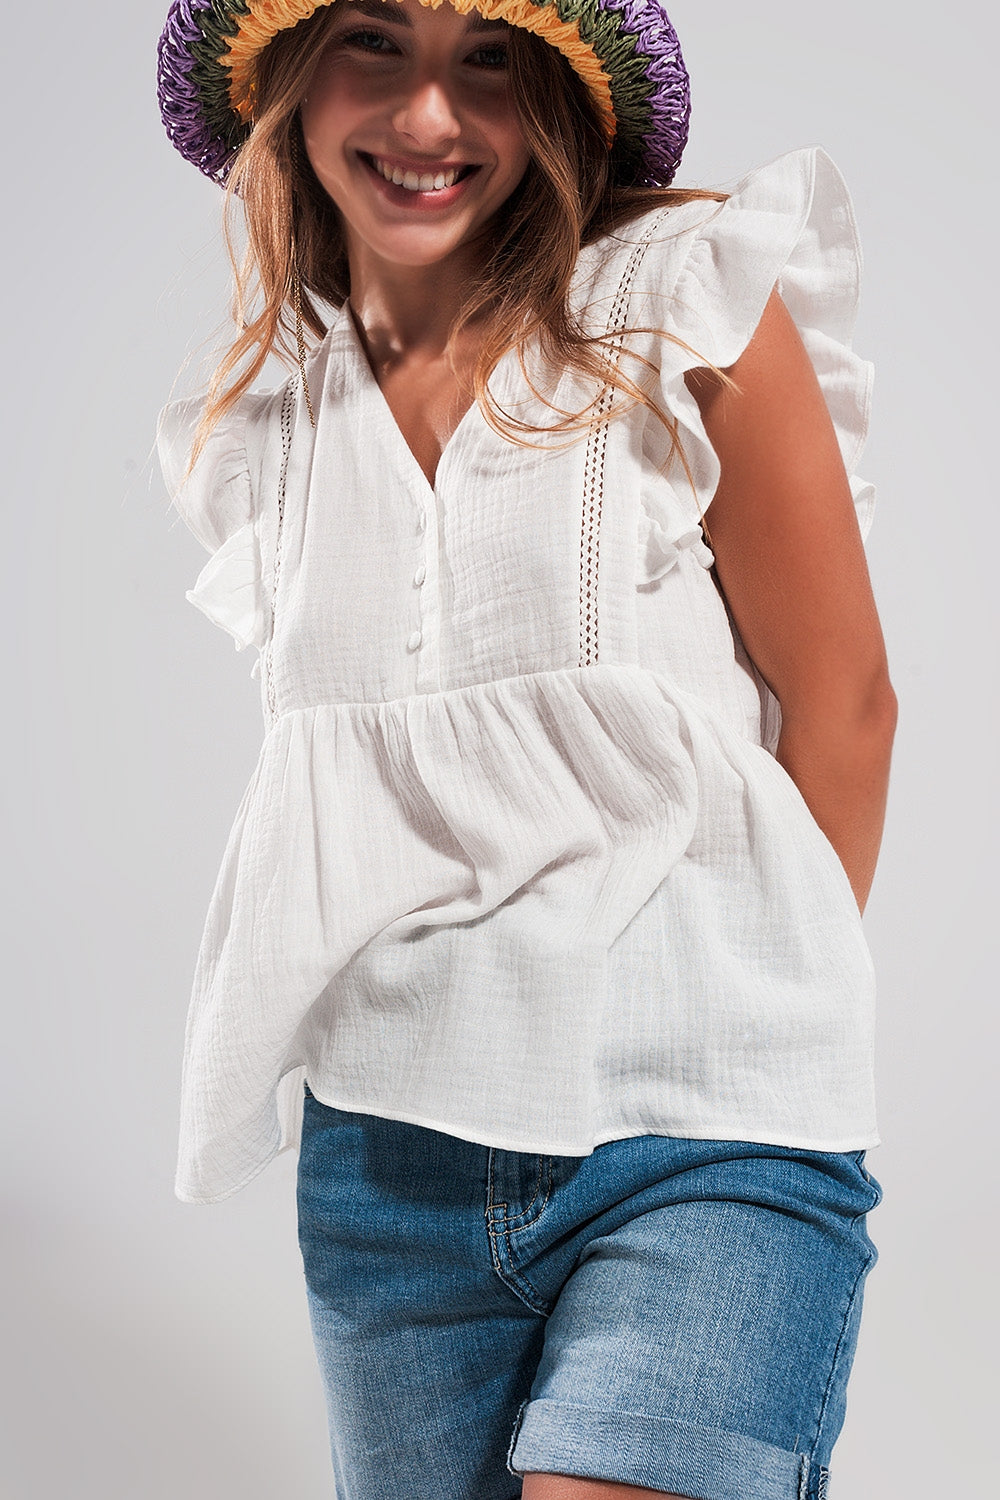 Cotton Tank Top With Ruffle Sleeves in White